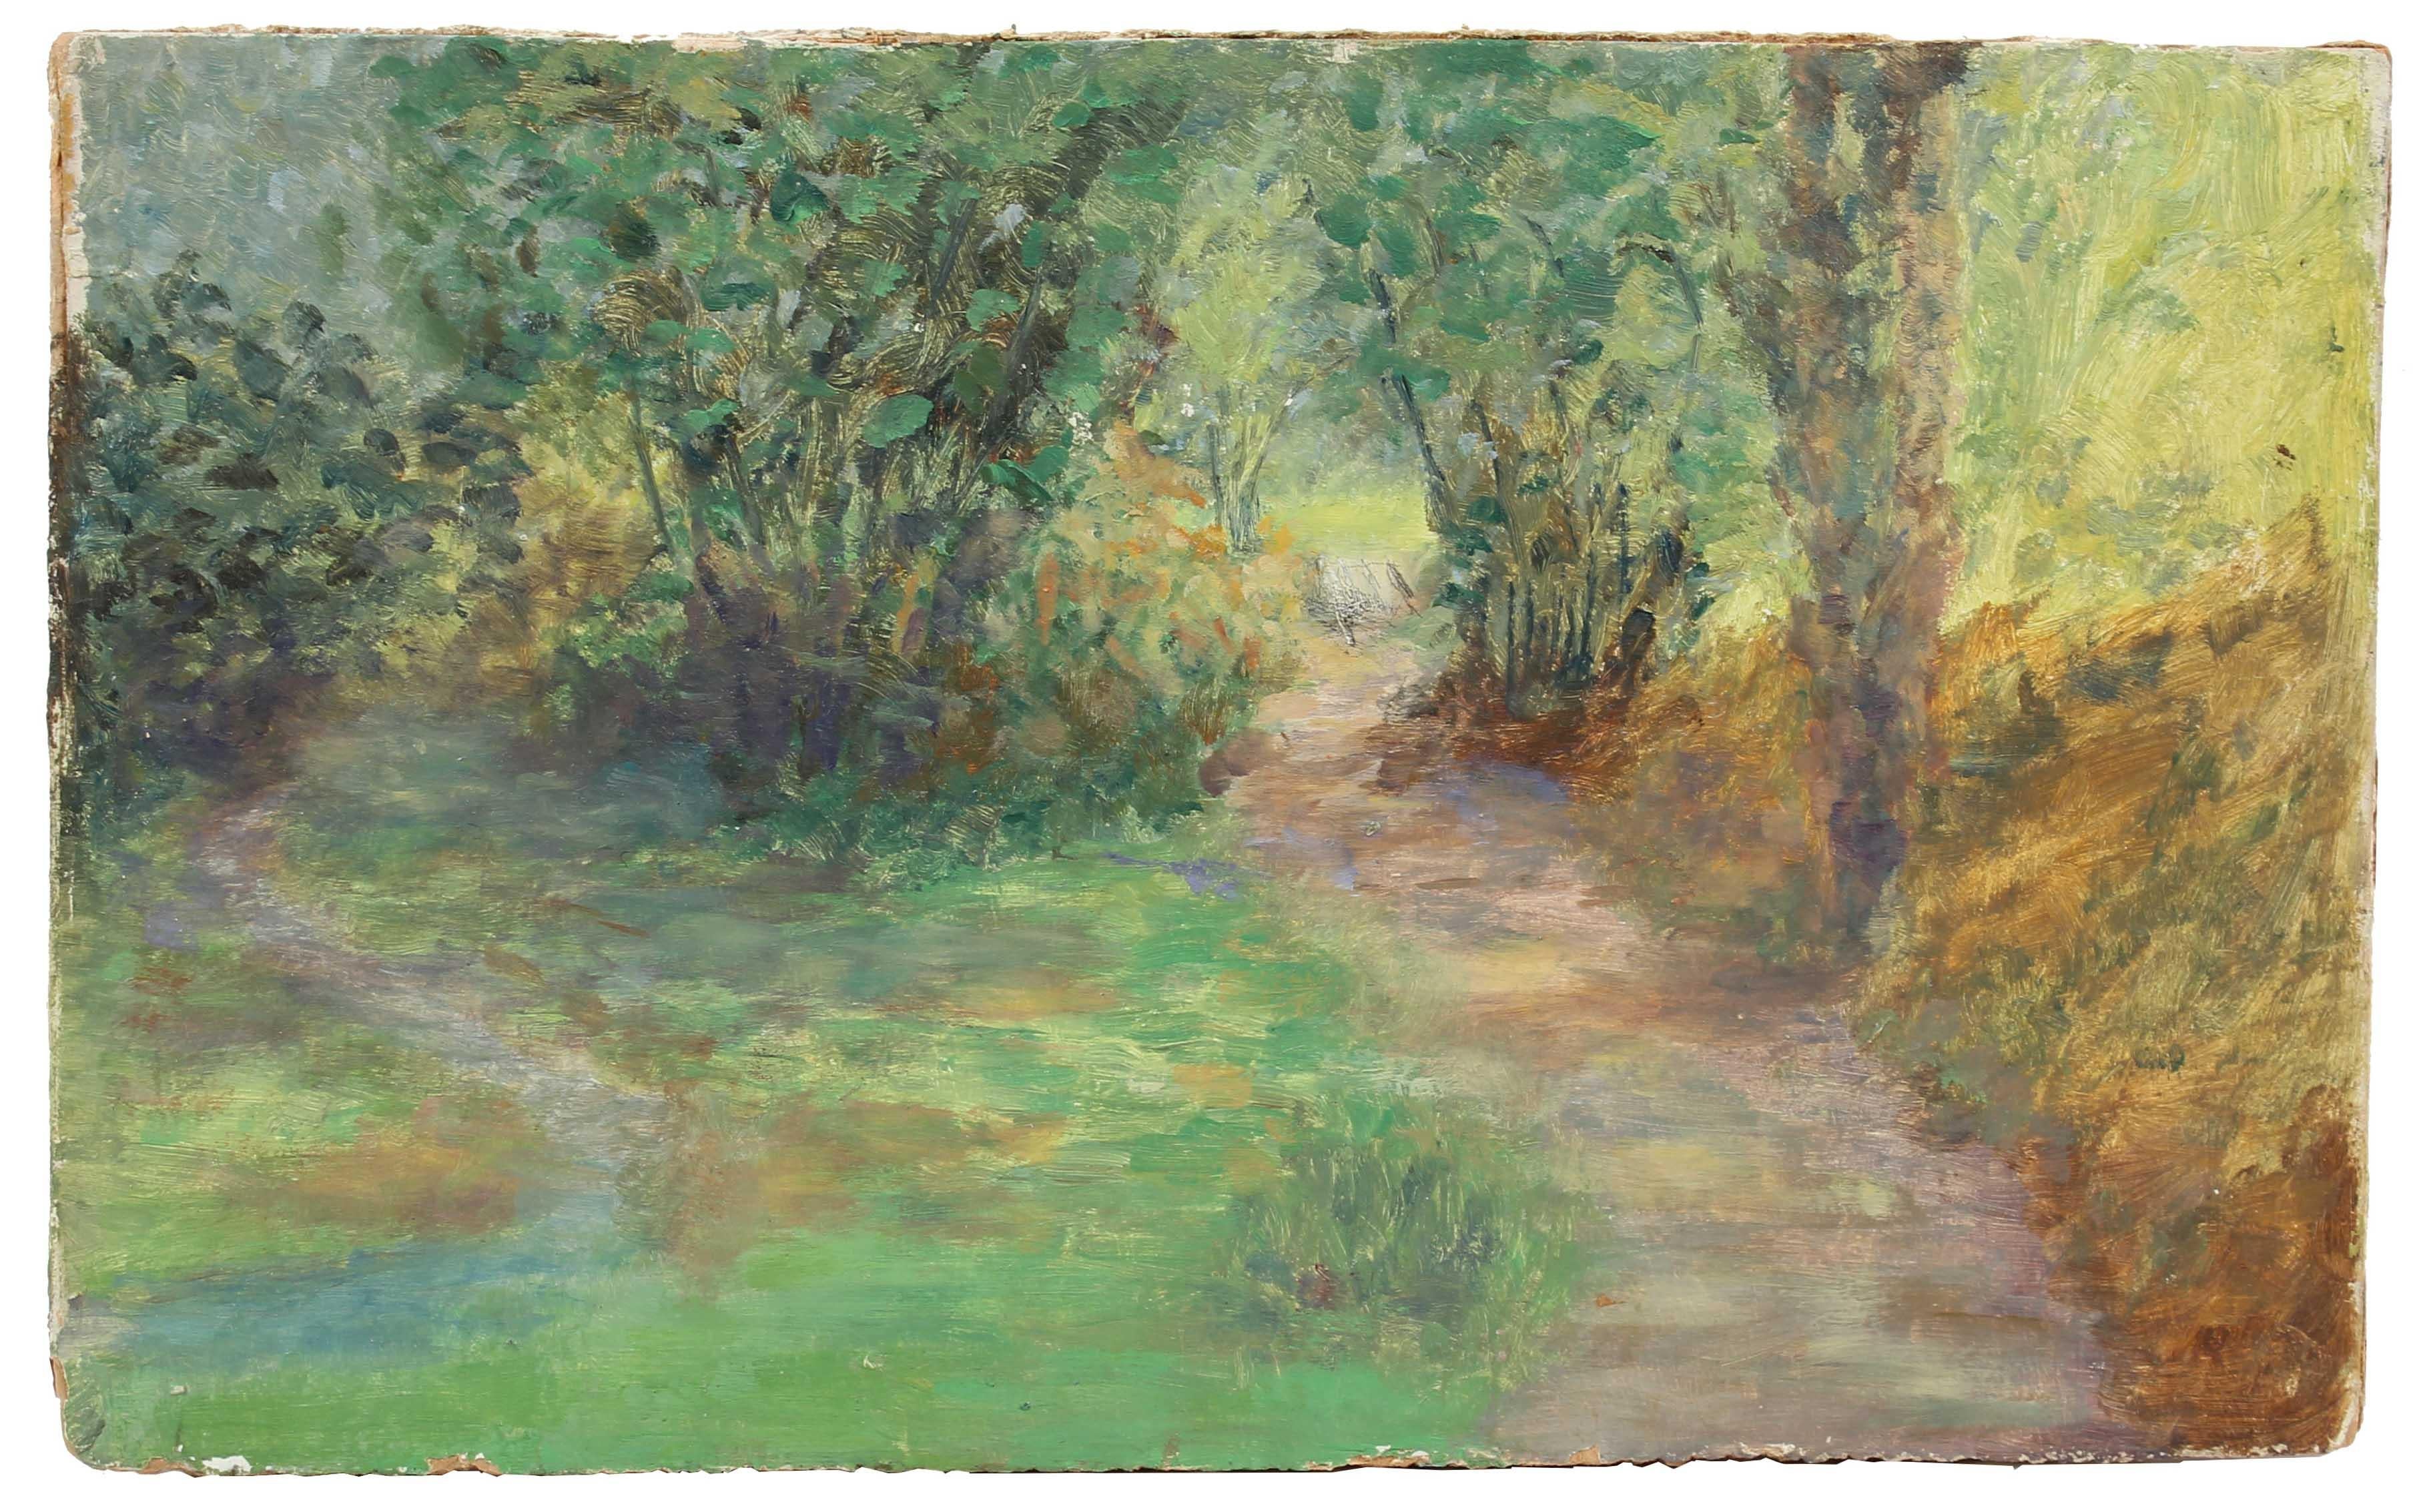 This circa 1900-1930s oil on paper board landscape with trees and a sunlit path is by Scottish-American artist Duncan Davidson (1876-1947).  Davidson studied at Gray’s School of Art in Scotland, Colarossi Academy in Paris, and the Slade School of